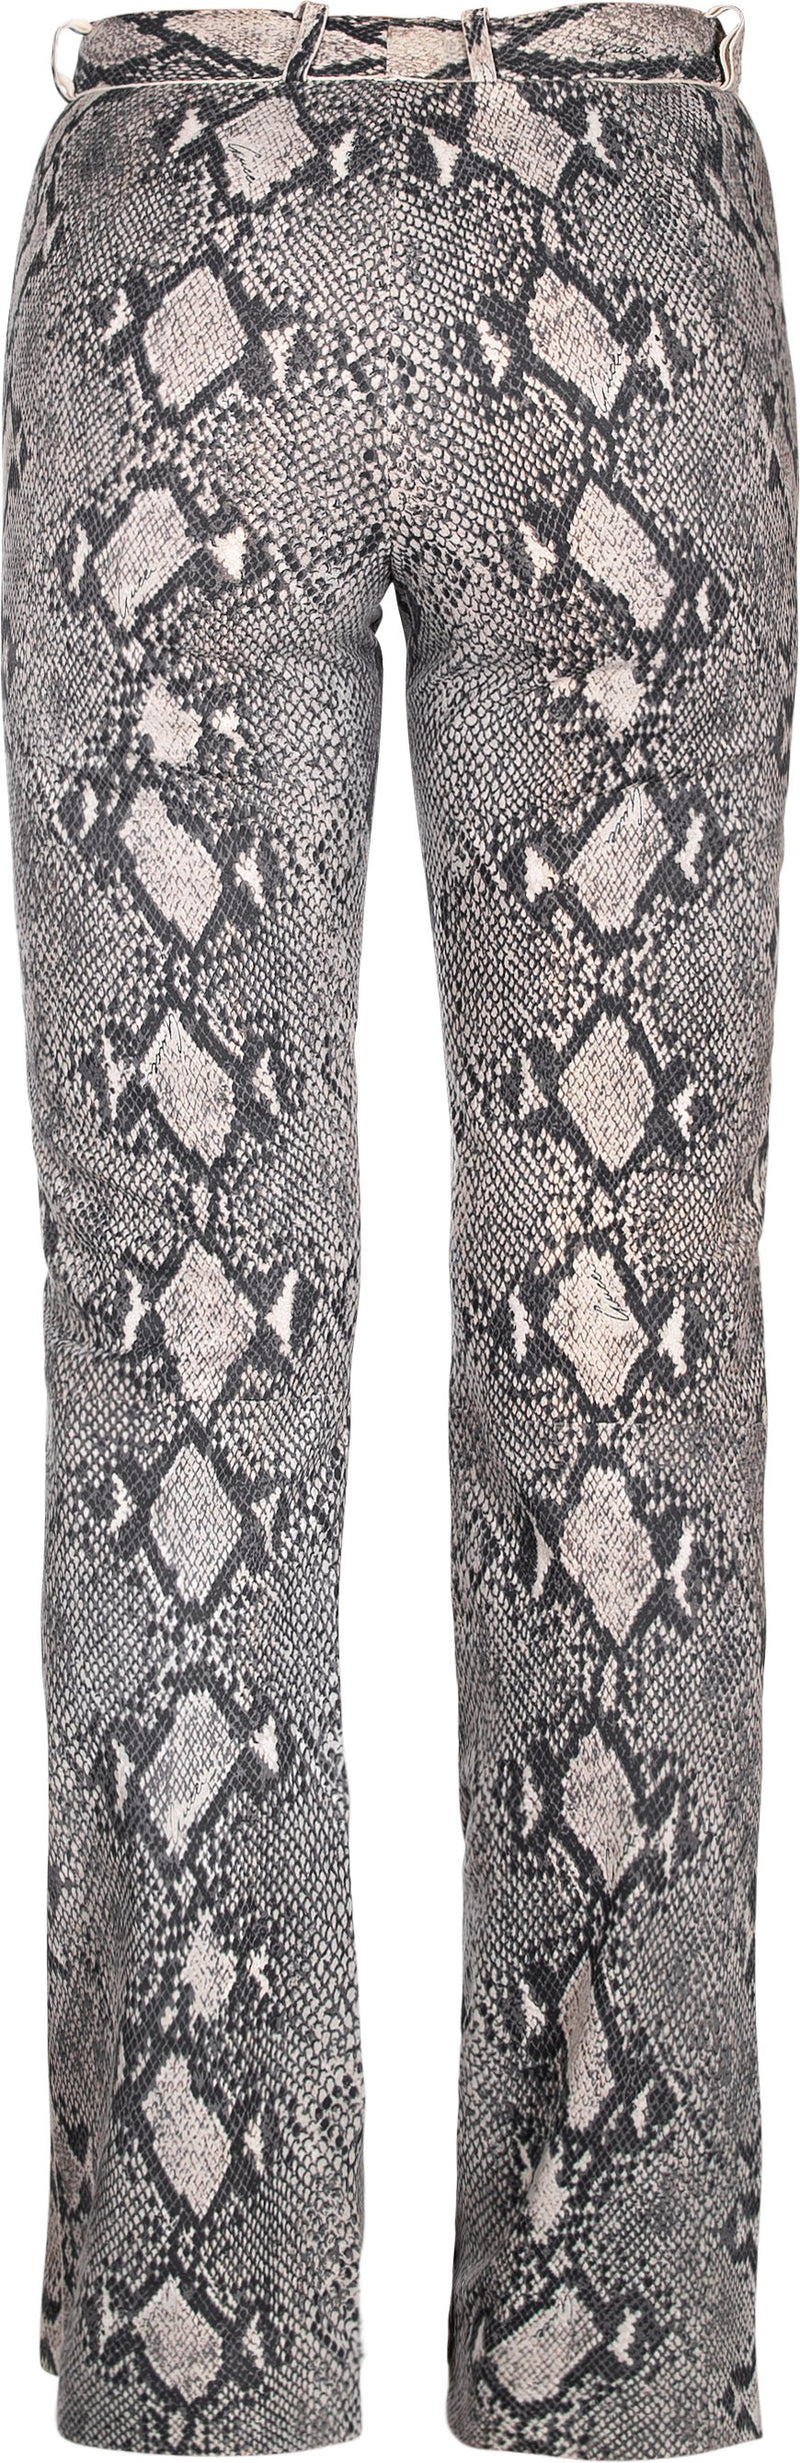 Gucci Spring 2000 Runway Python Printed Leather Pants